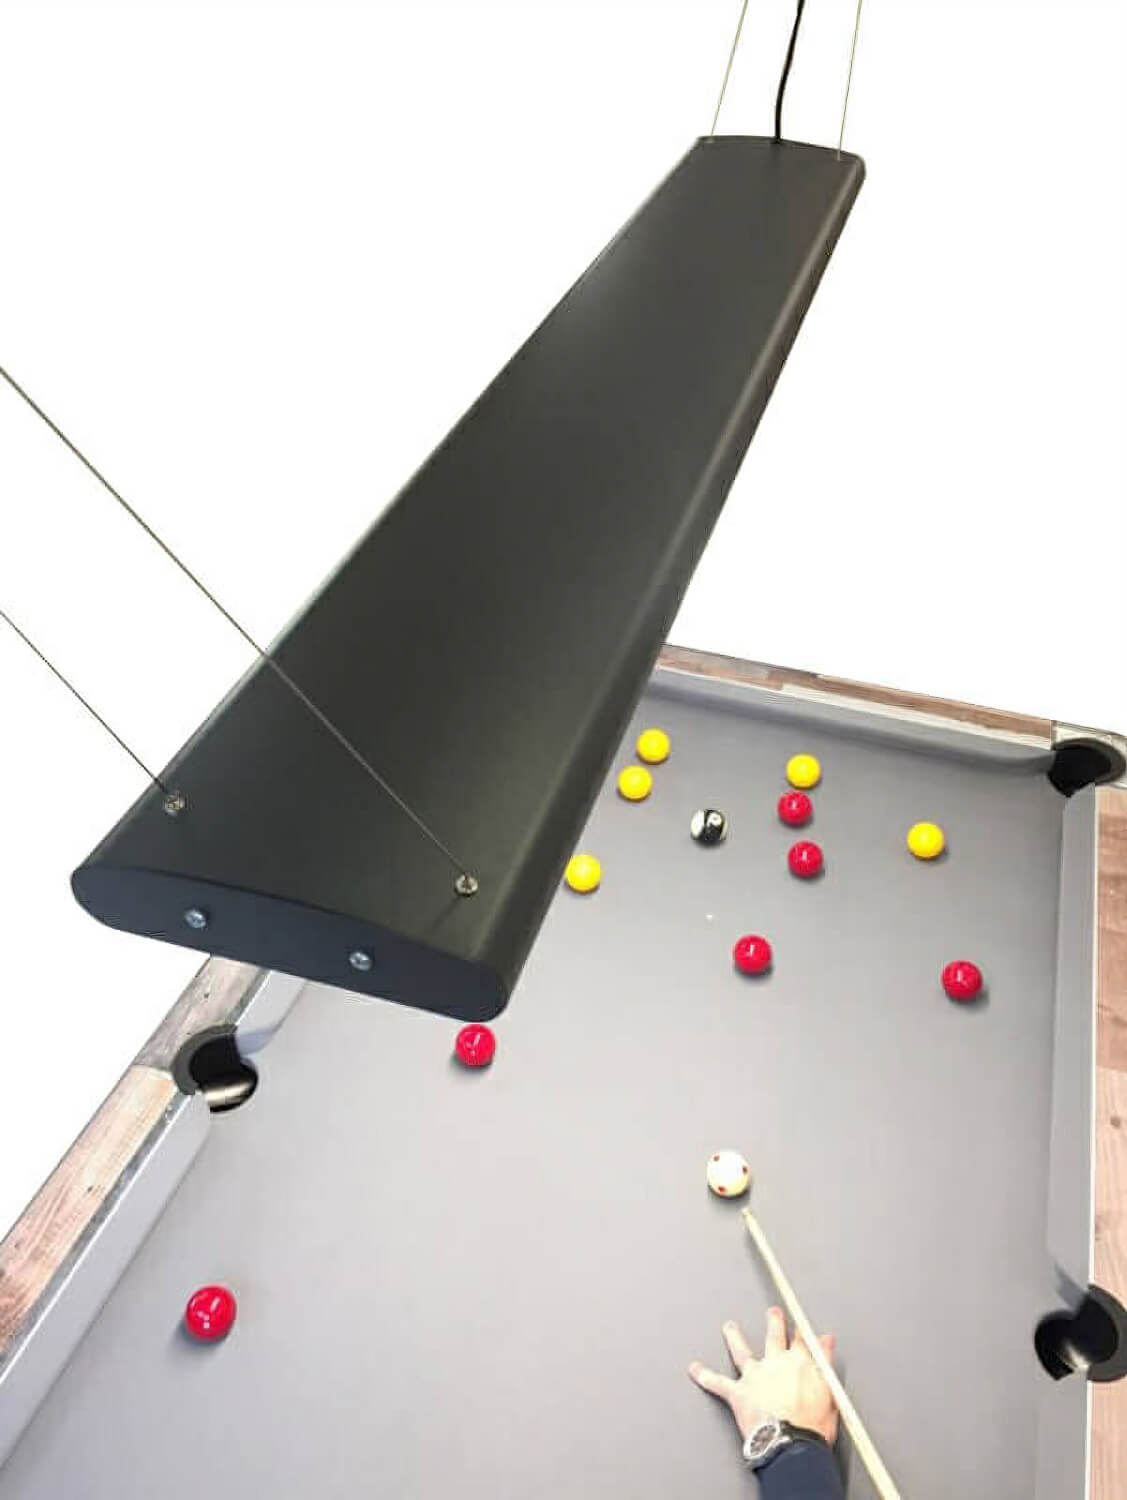 Supreme Led Pool Snooker Table Light, Snooker Table Lighting Requirements